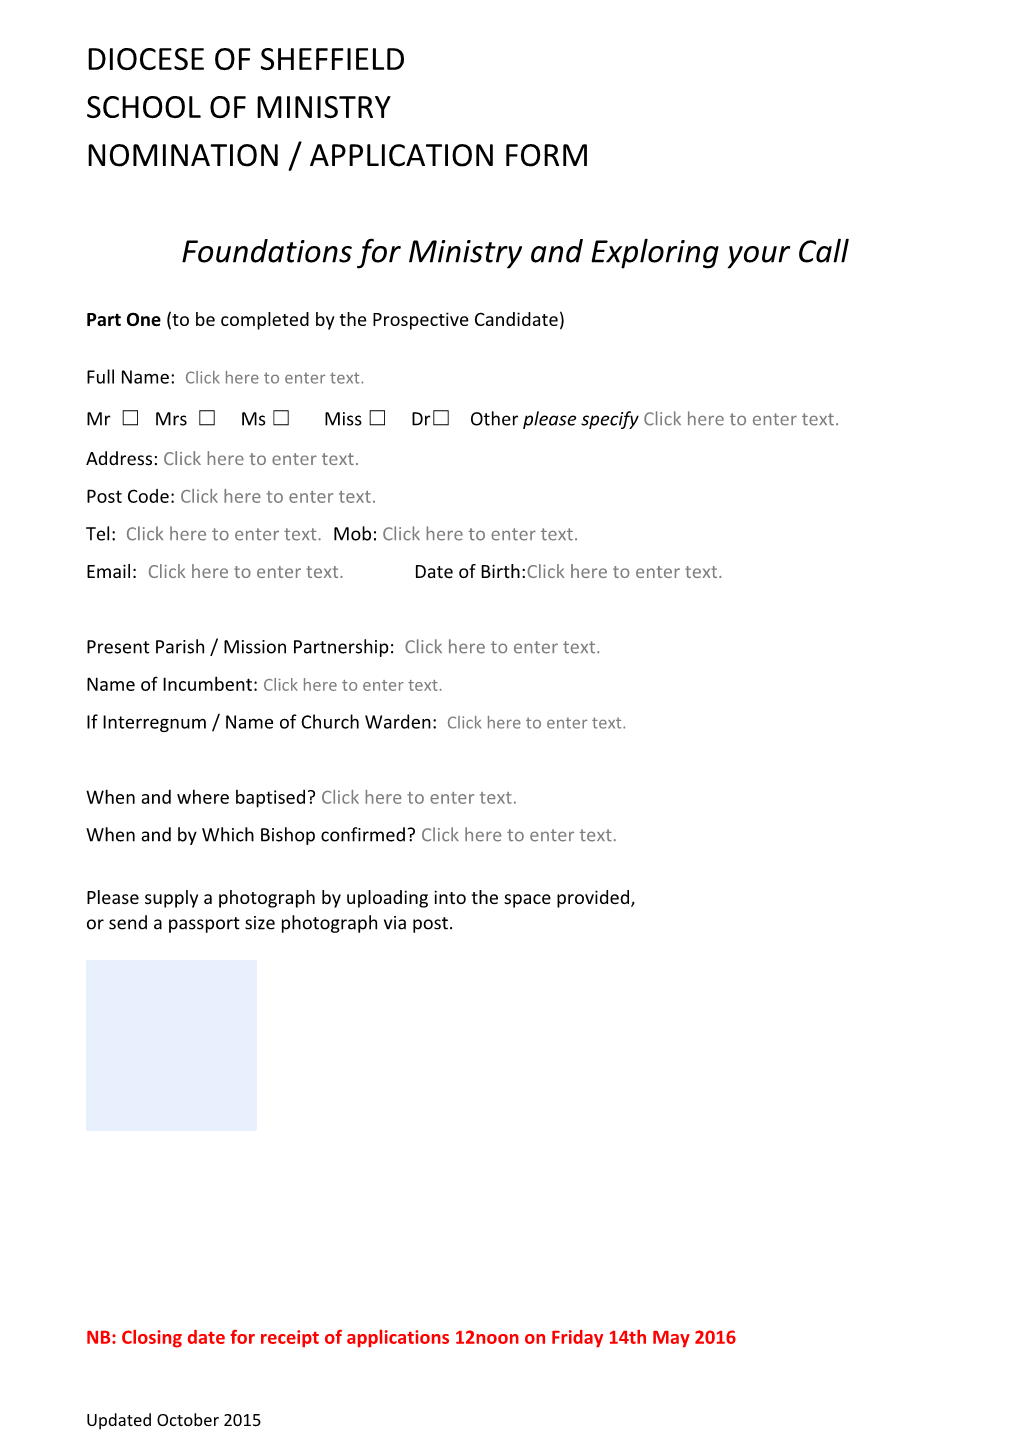 Foundations for Ministry and Exploring Your Call